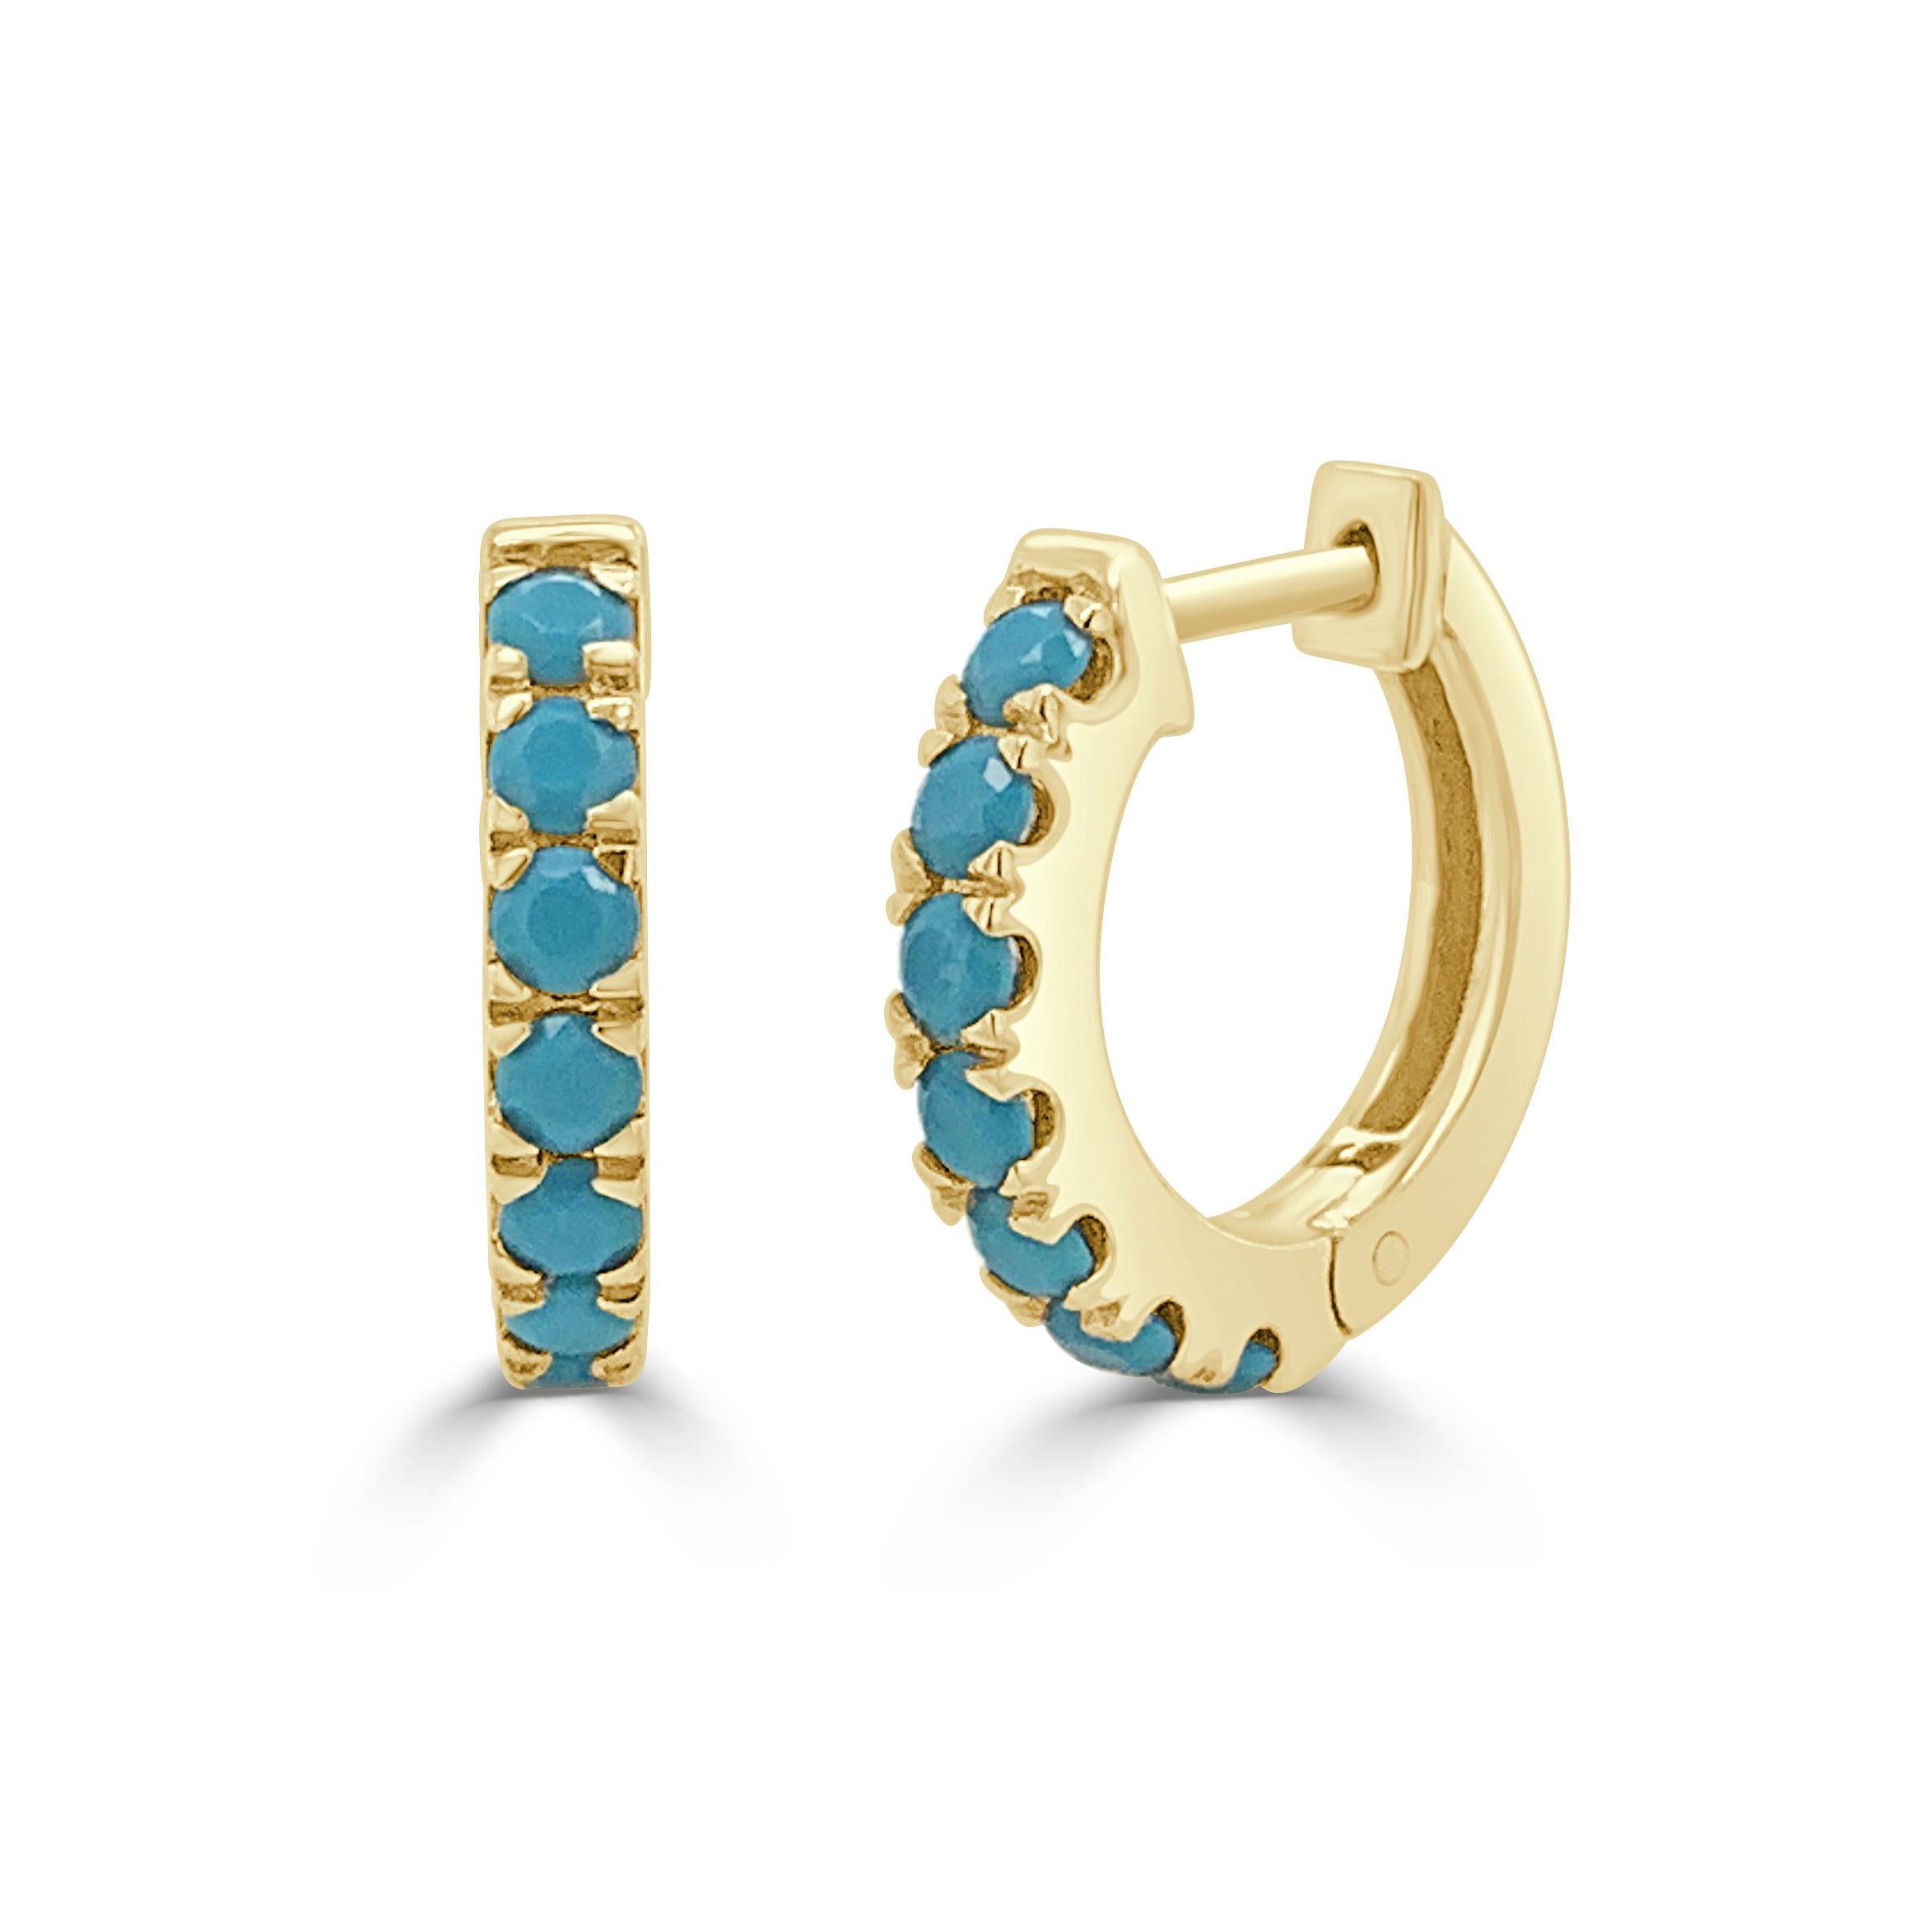 Quality Earrings Set: Made from real 14k gold , featuring a single line of 14 round blue turquoise 1/2